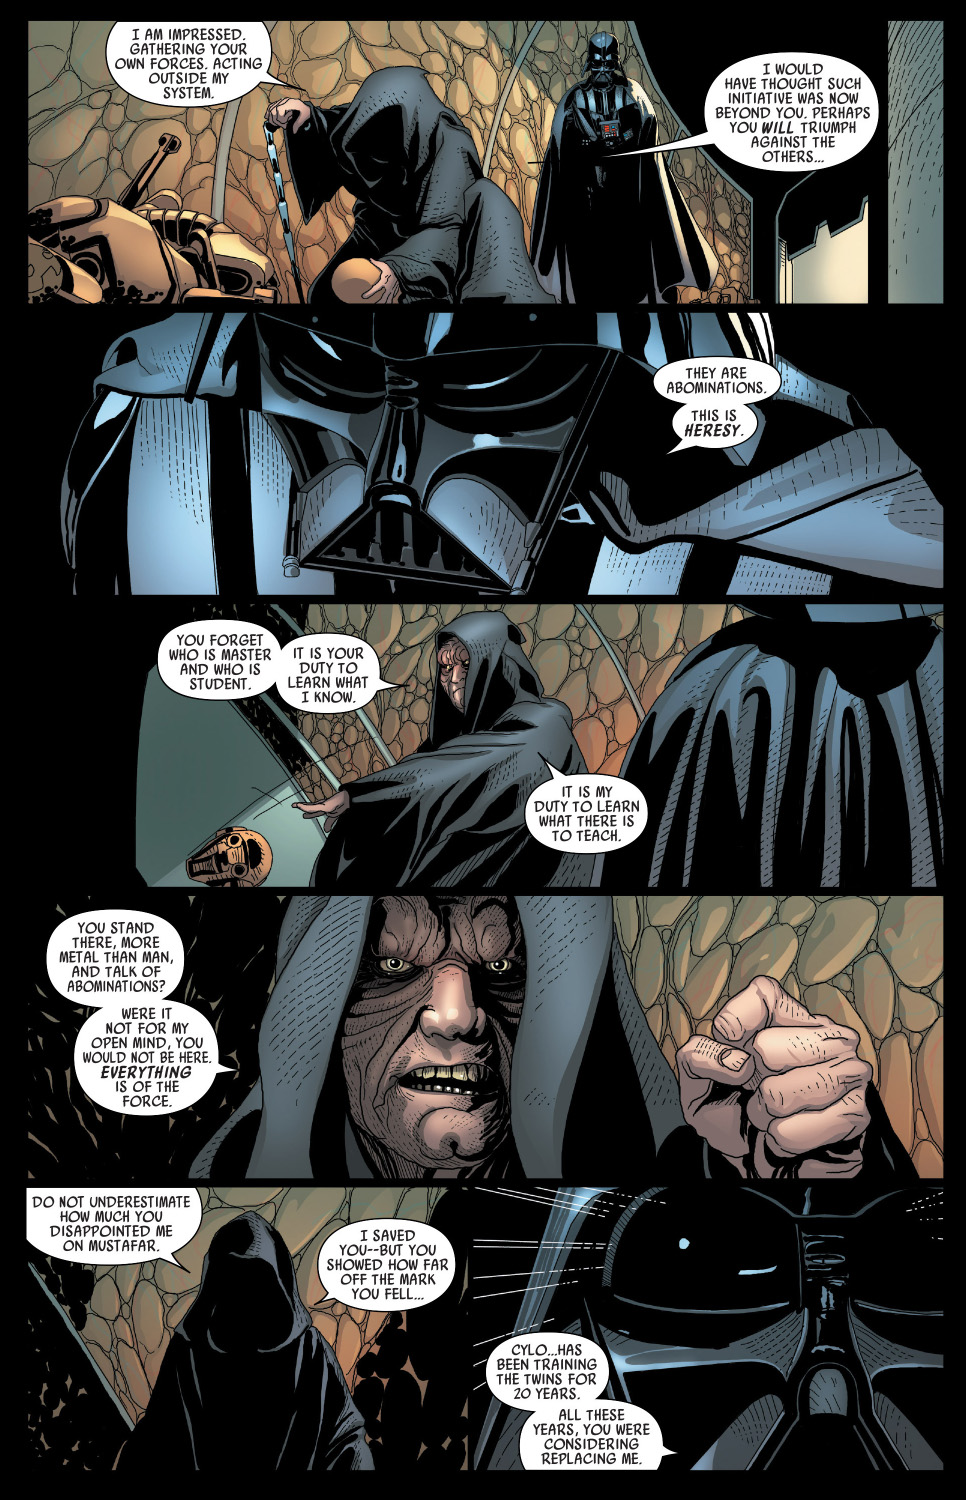 palpatine reminds darth vader of the way of the sith